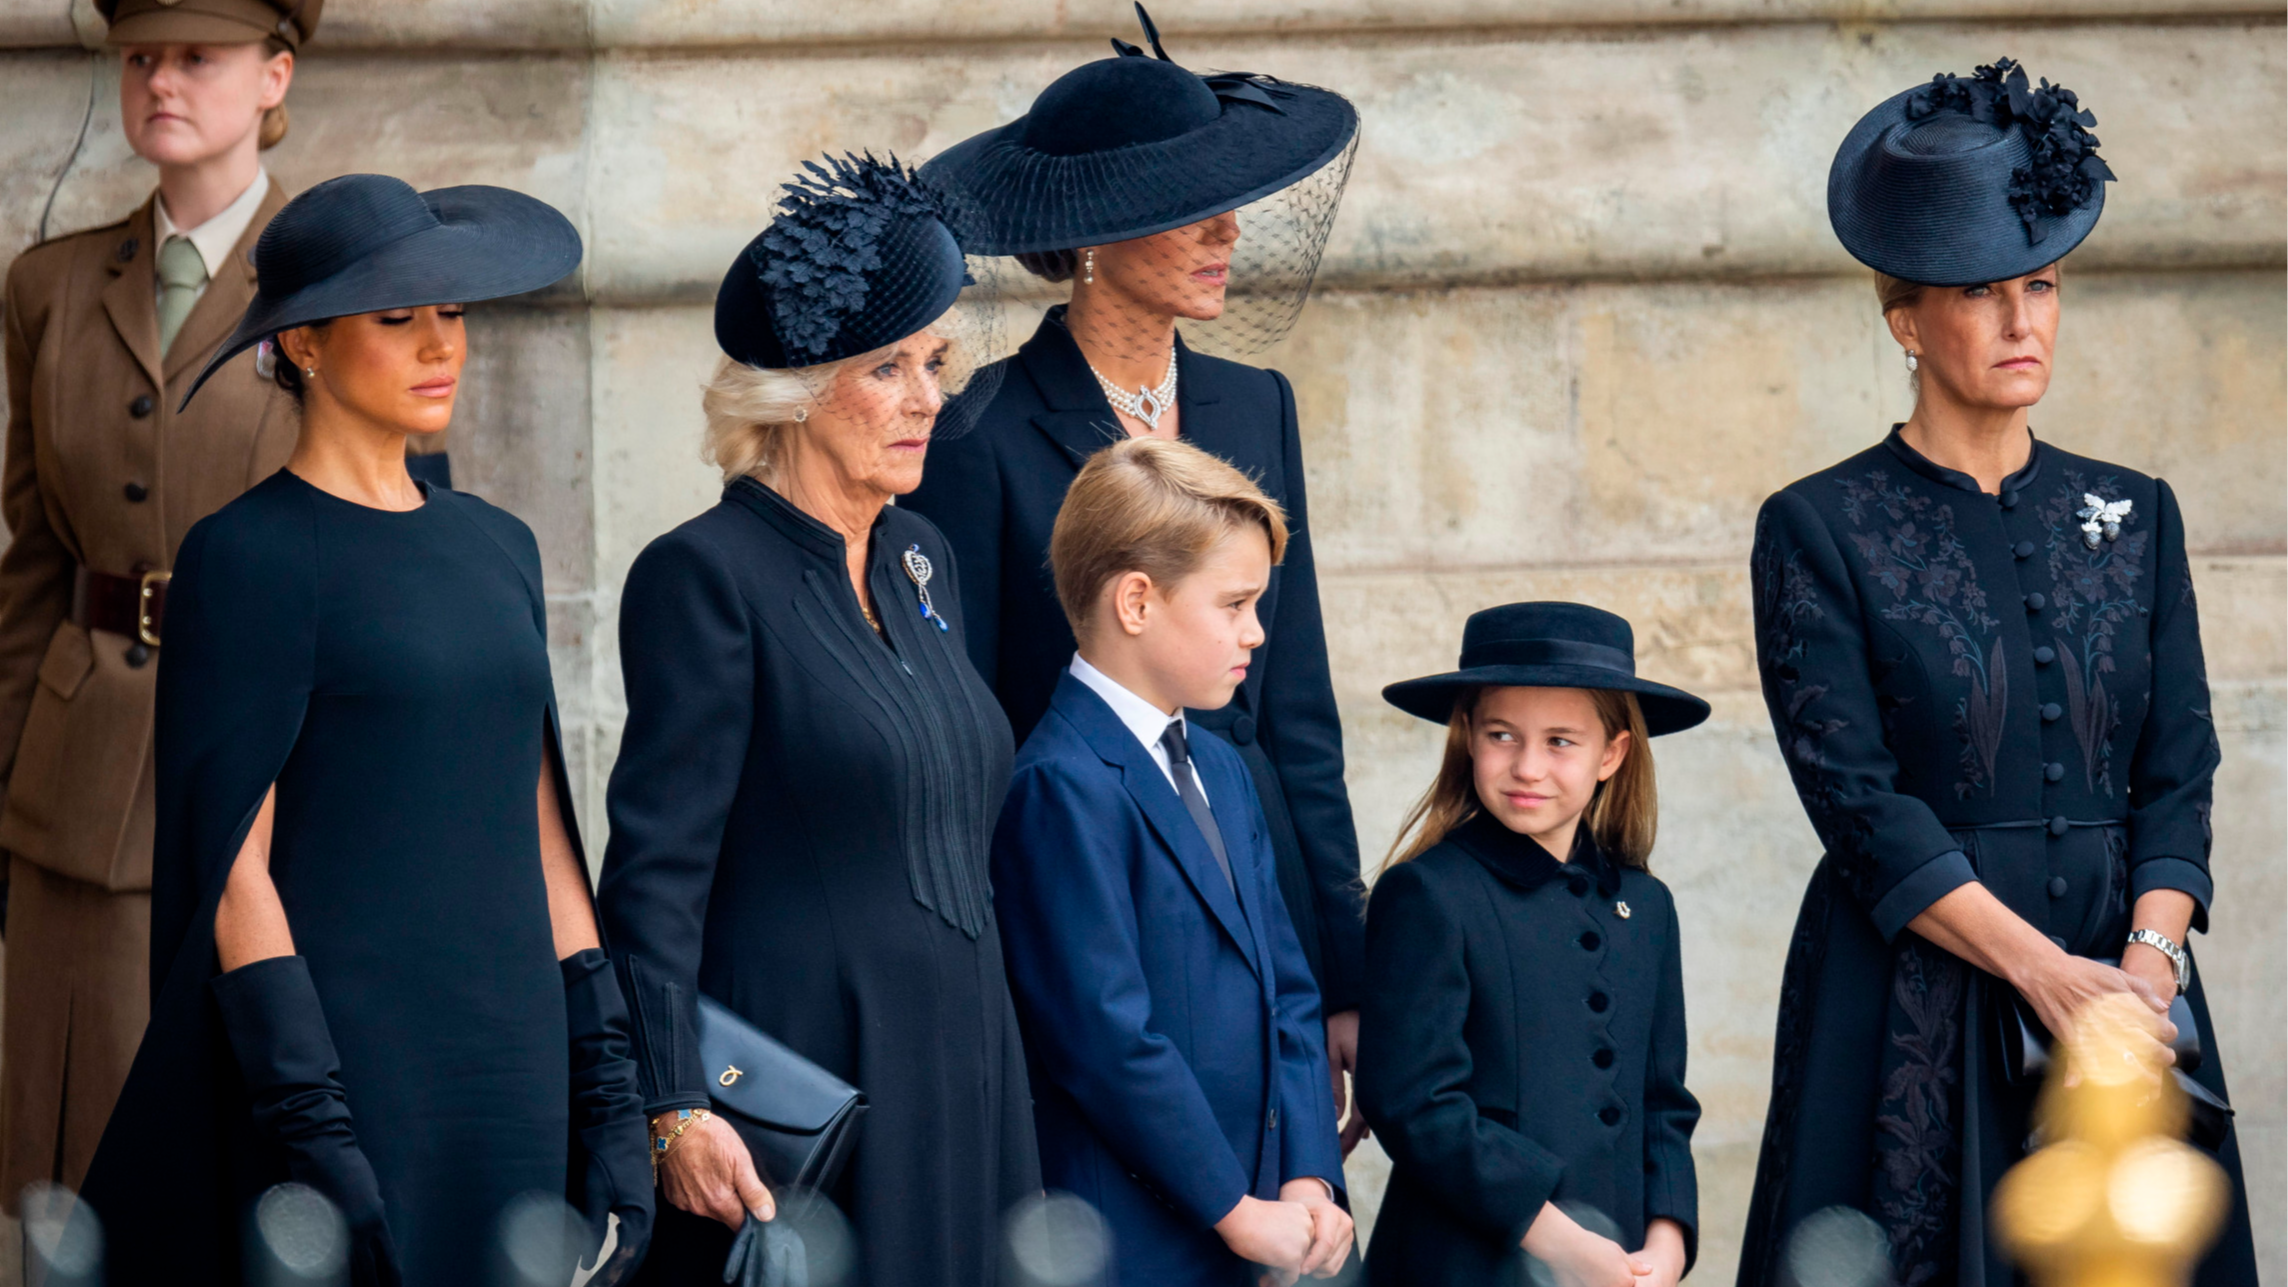 Black Navy And Pearls How The Royals Dressed To Mourn The Queen Financial Times